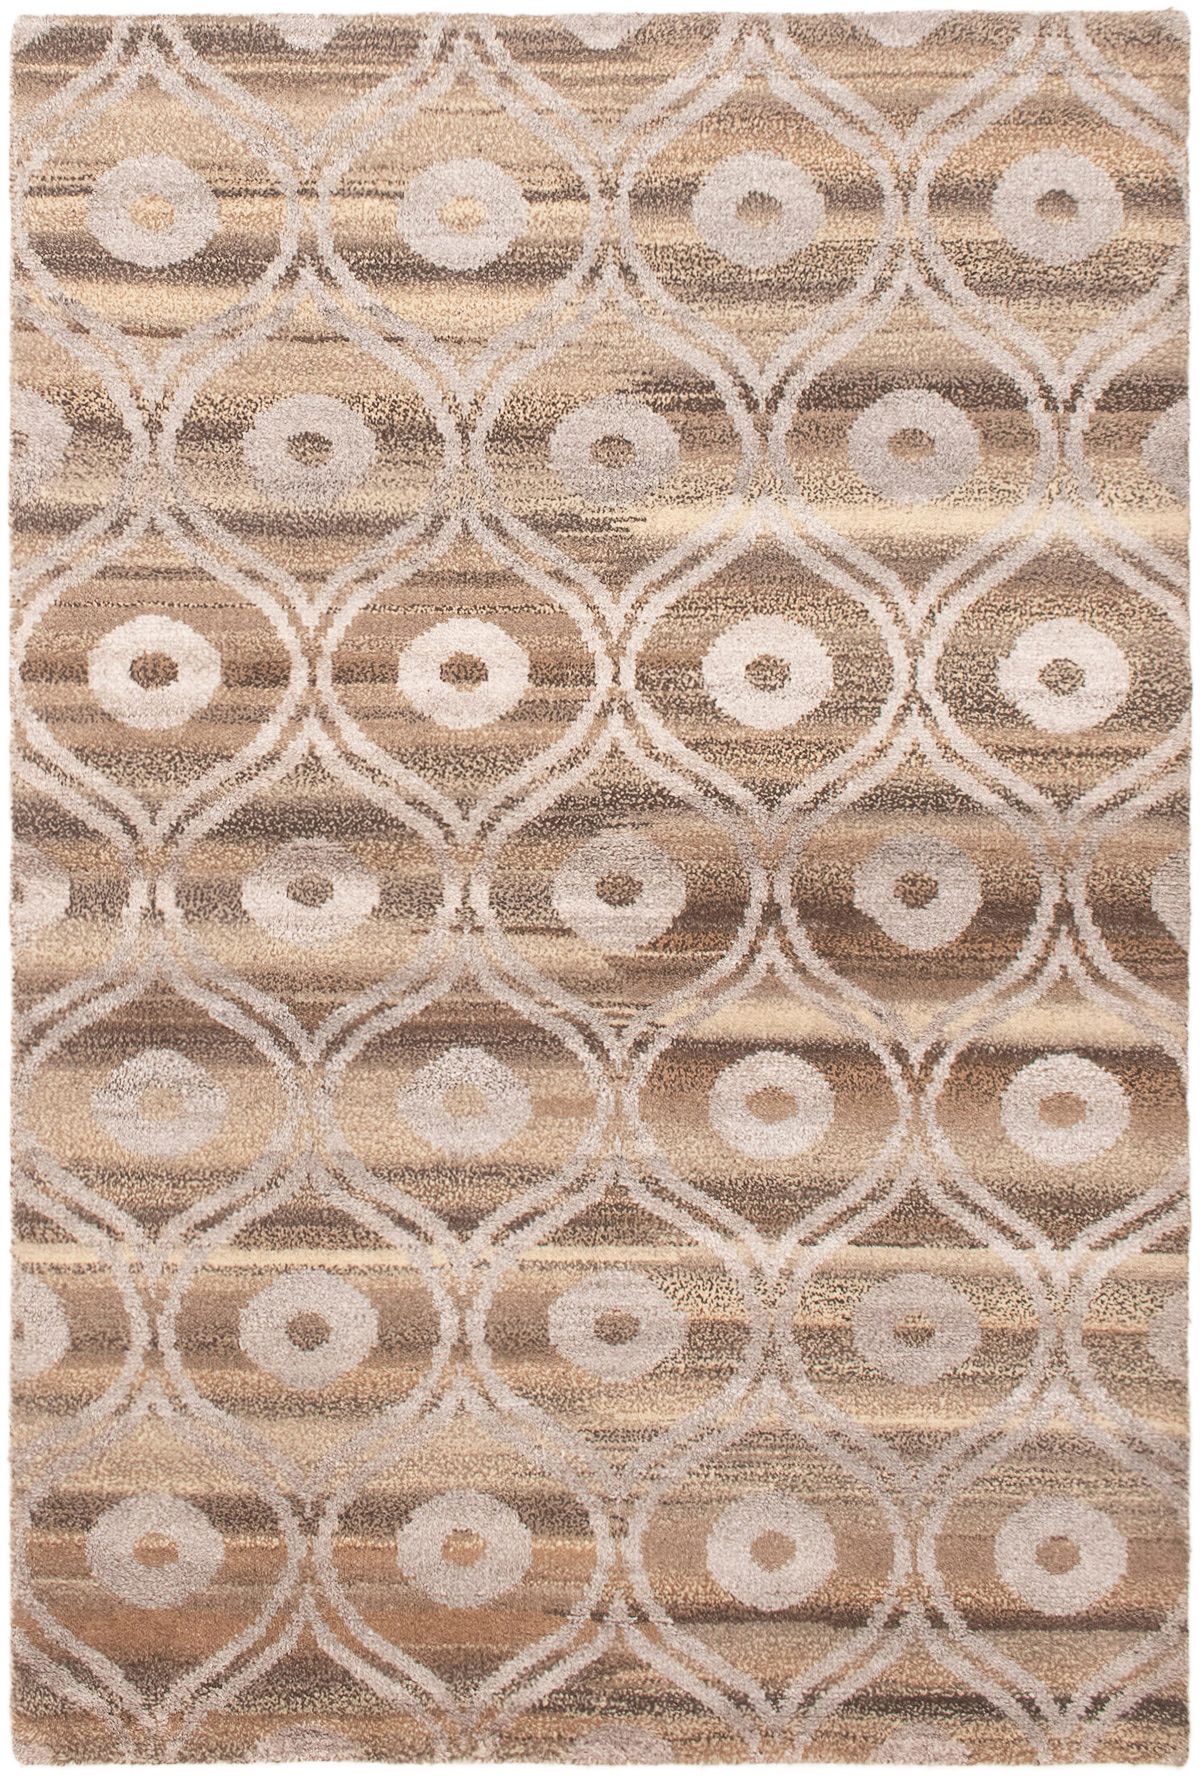 Hand-knotted Tangier Light Brown Wool Rug 5'3" x 7'10" Size: 5'3" x 7'10"  